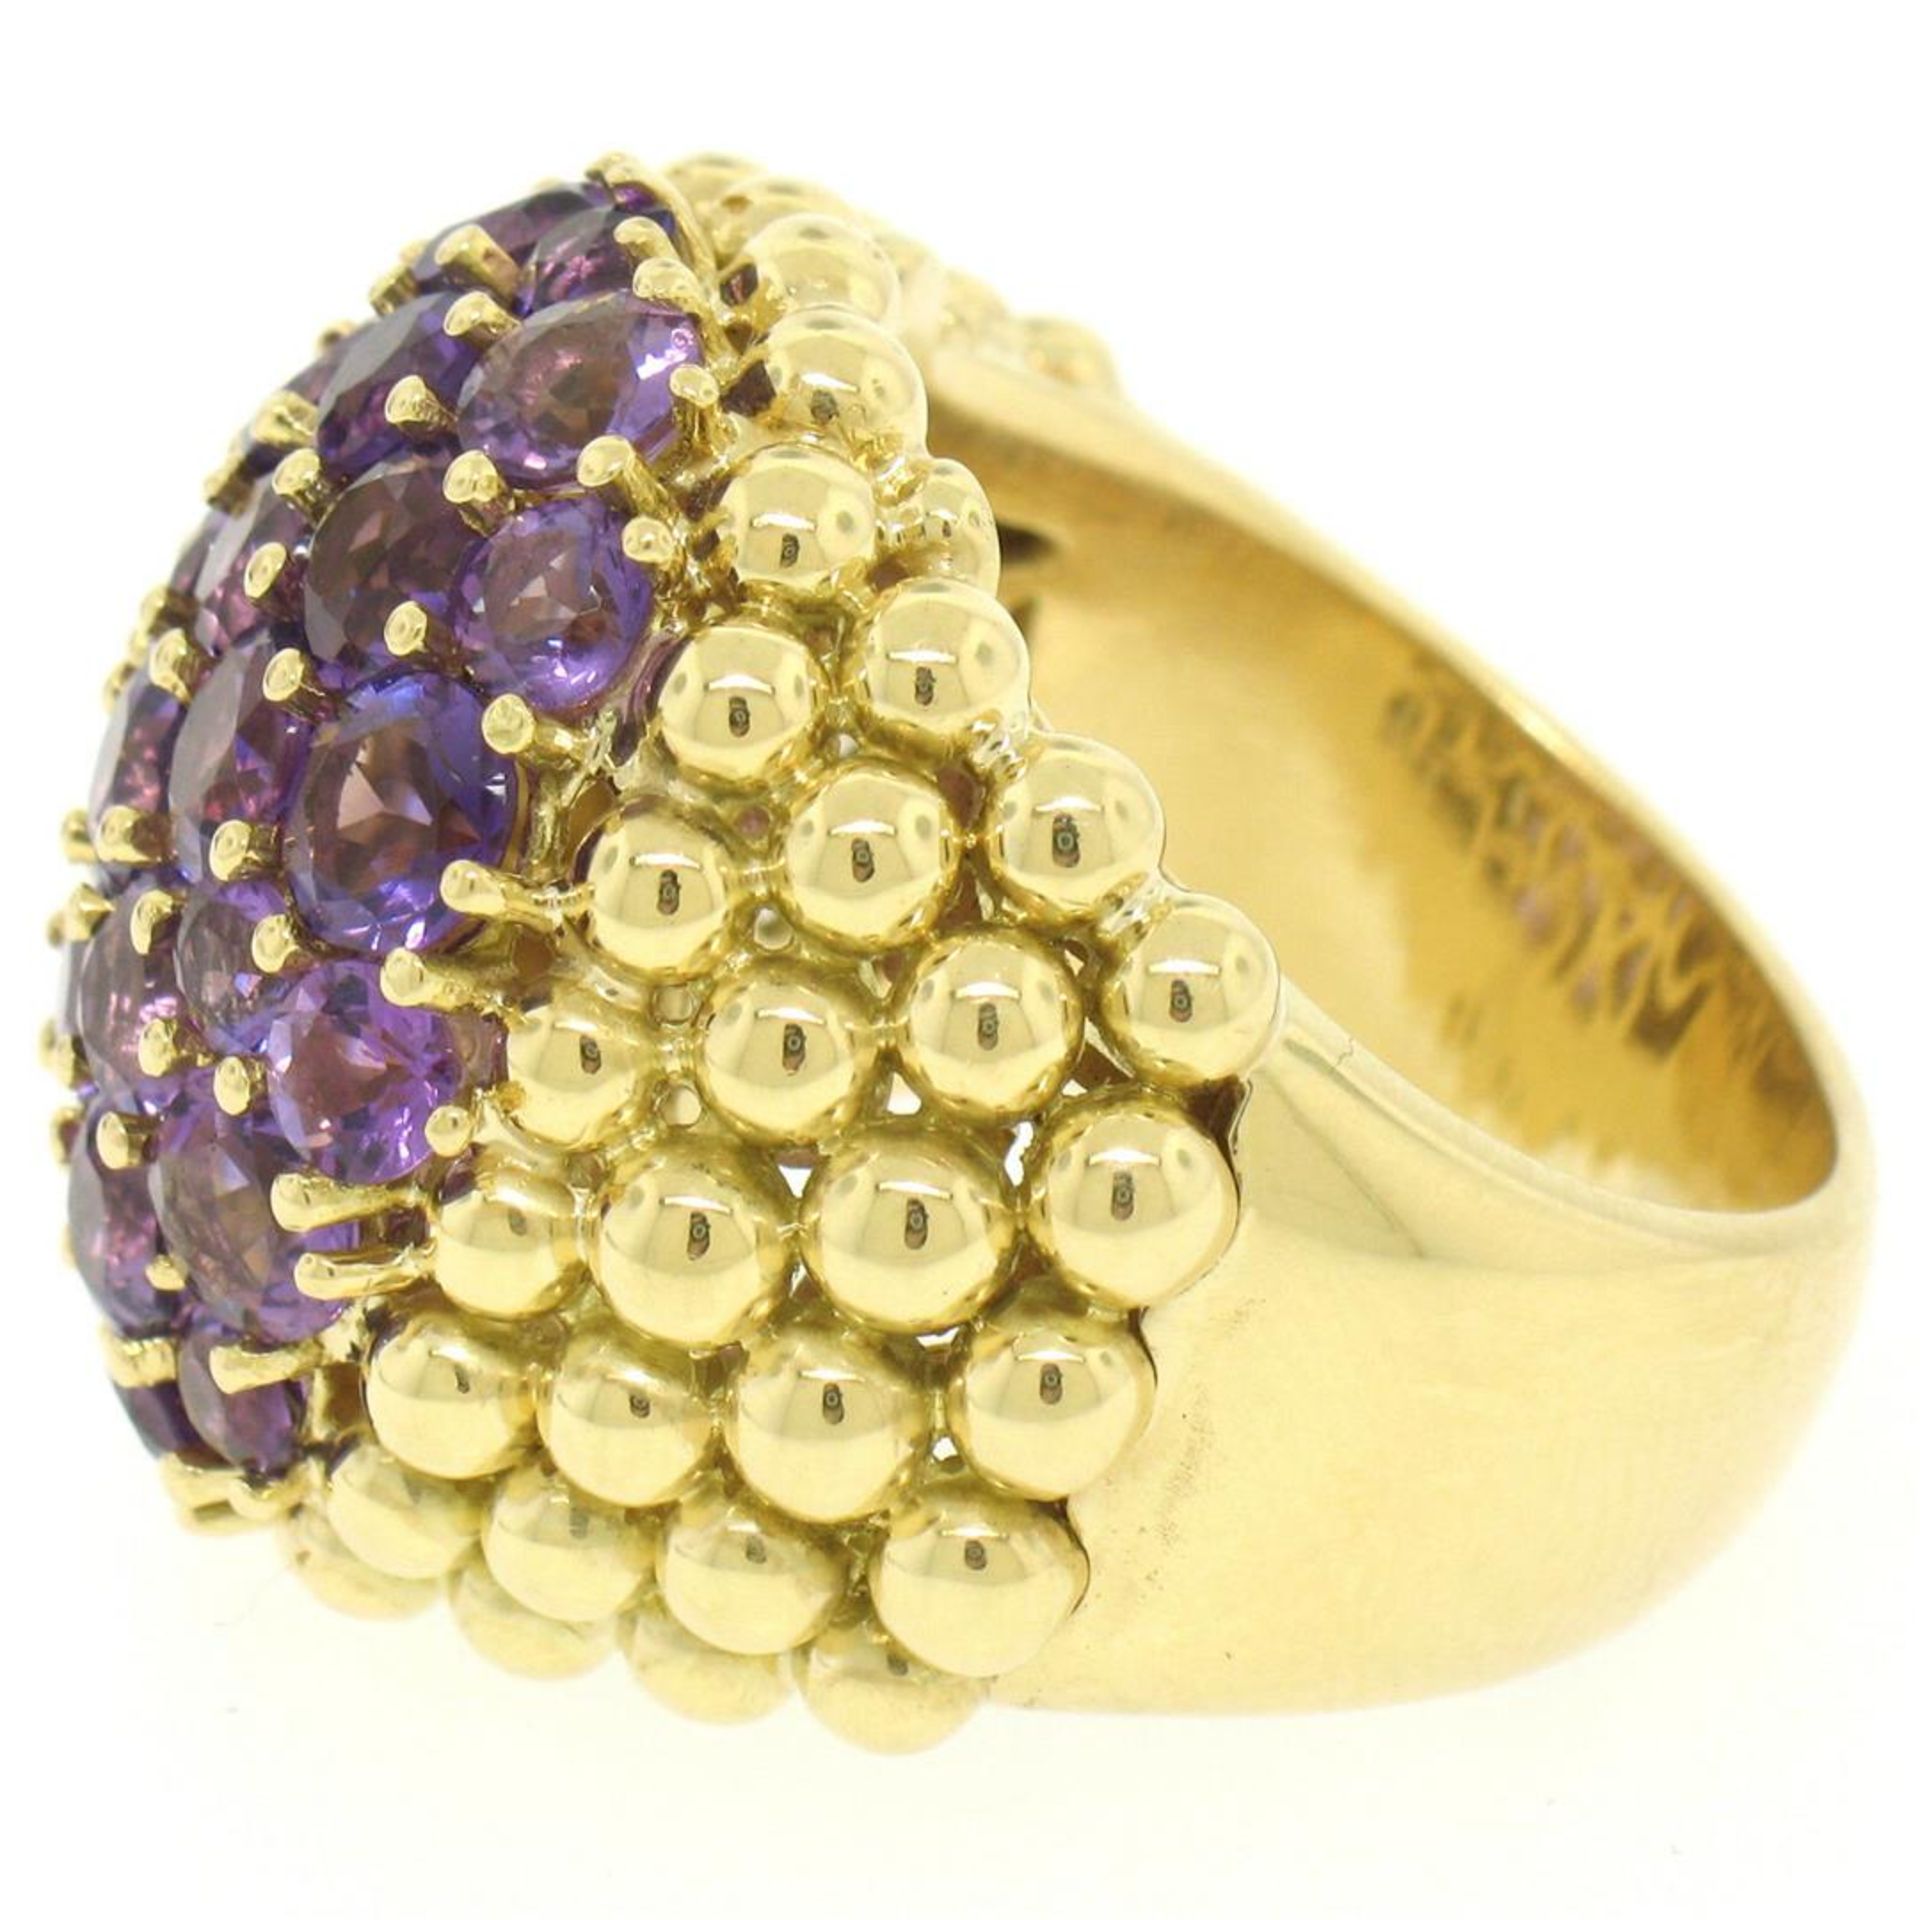 18K Yellow Gold 7.50 ctw Round Amethyst Domed Popcorn Cluster Ring - Image 3 of 6